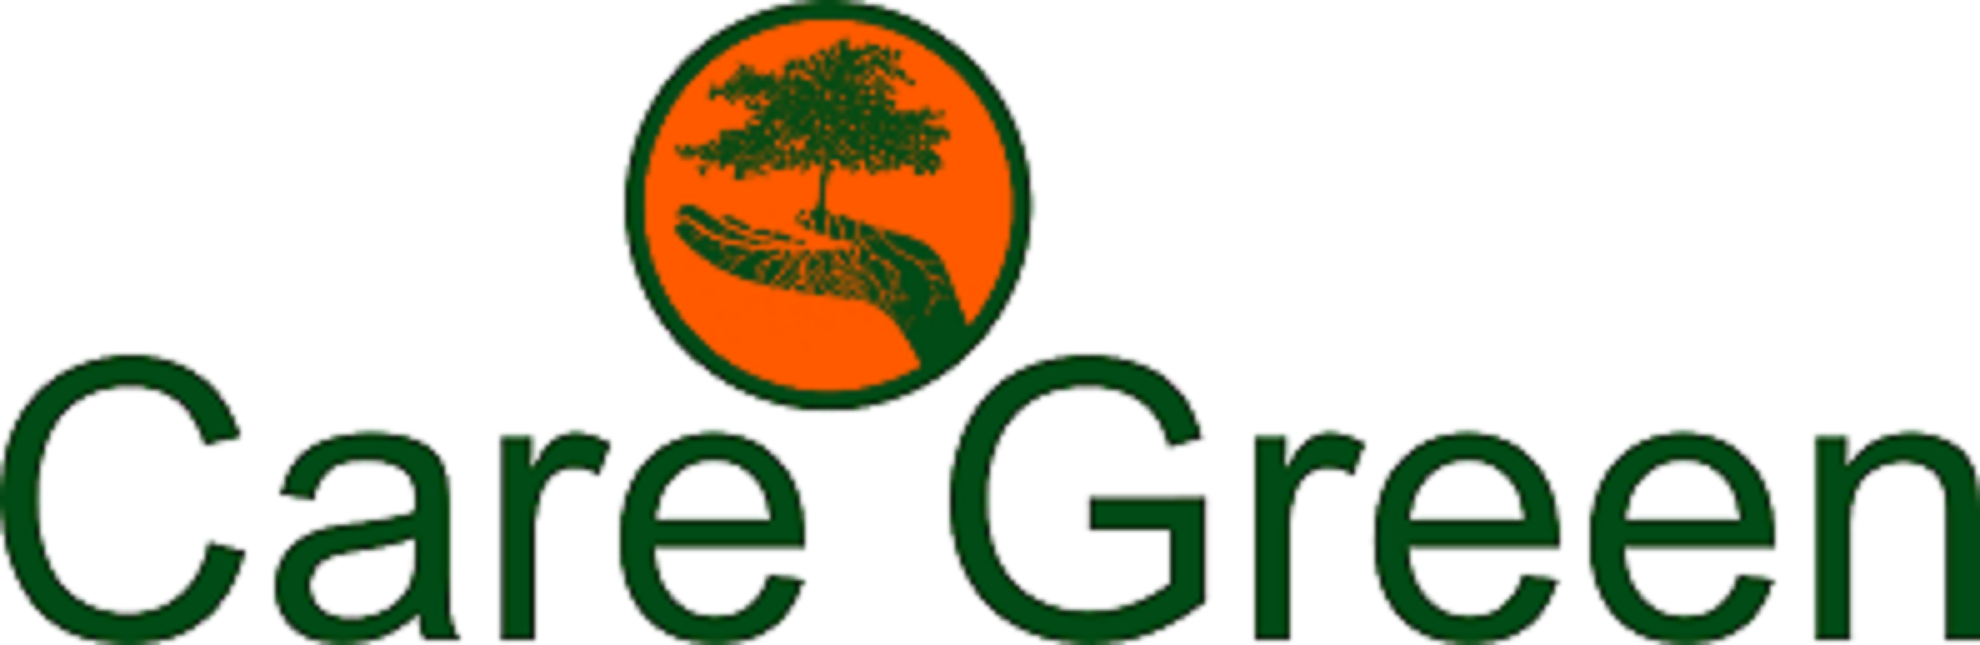 Care Green Landscaping & Trees